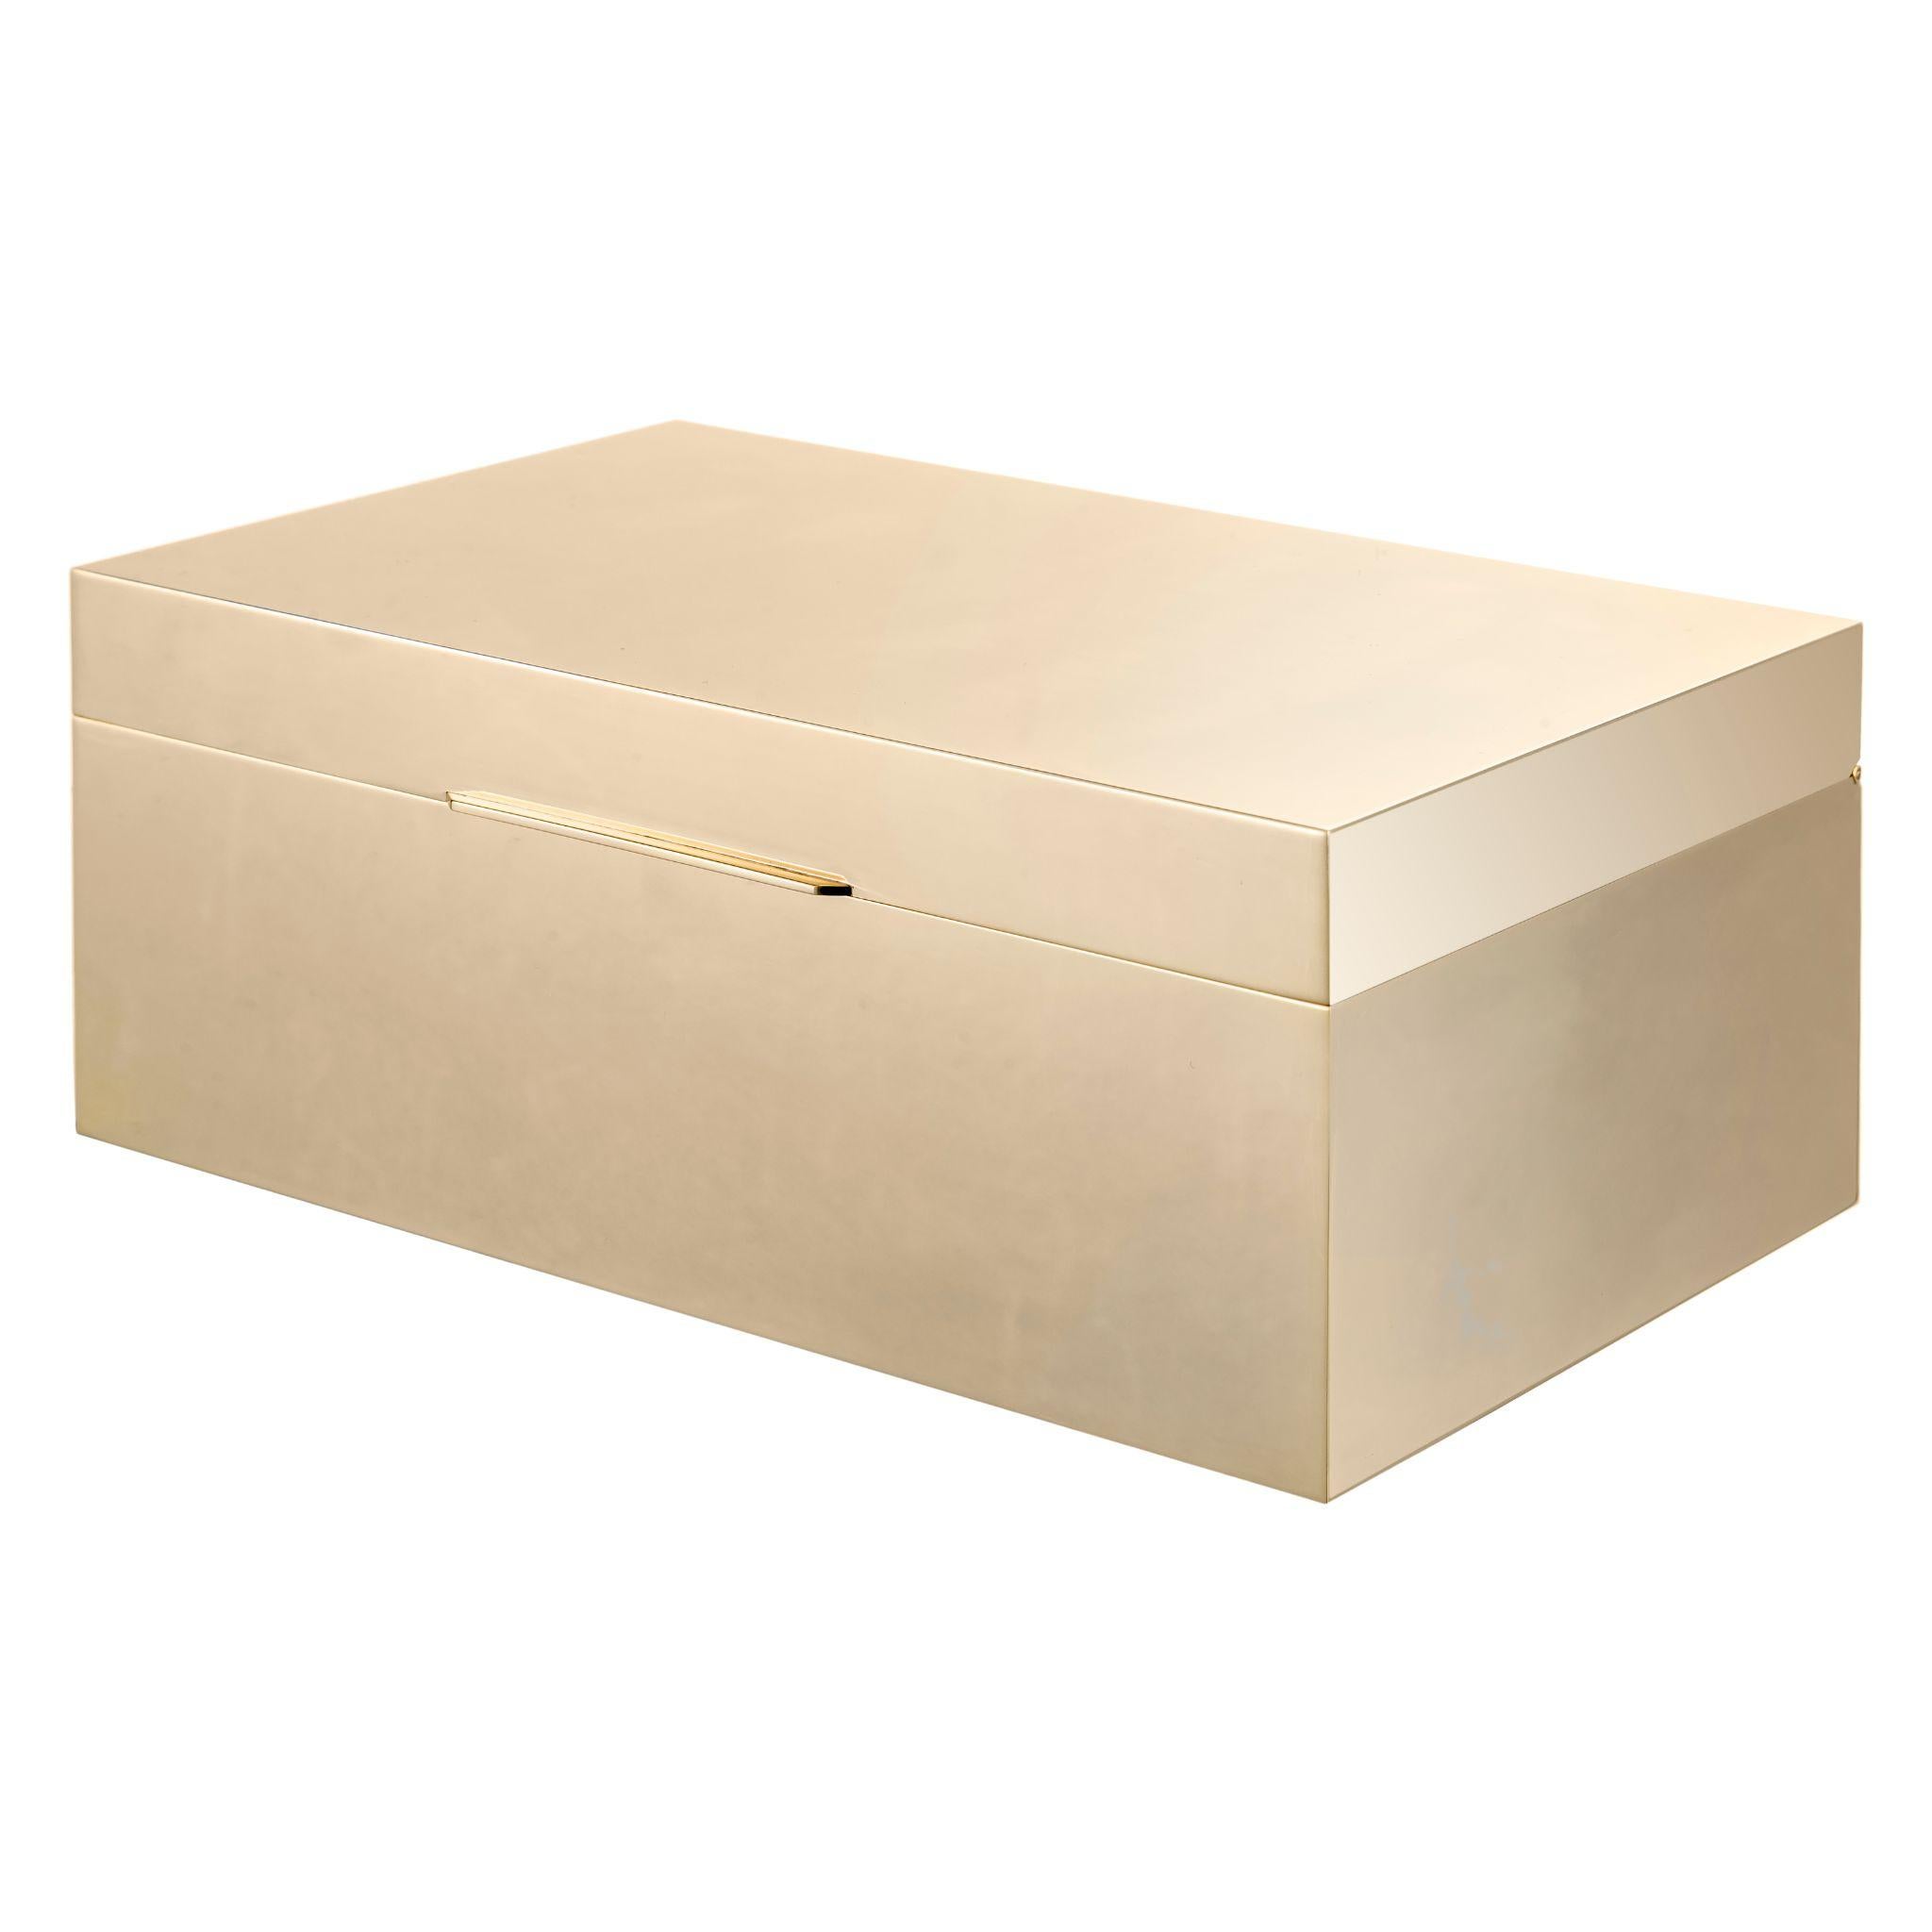 Discover the perfect rectangular brass box with a zippered top for your treasures! This high-quality box is perfect for storing jewelry, trinkets, and other small items. With its elegant design and sturdy construction, it's sure to become a